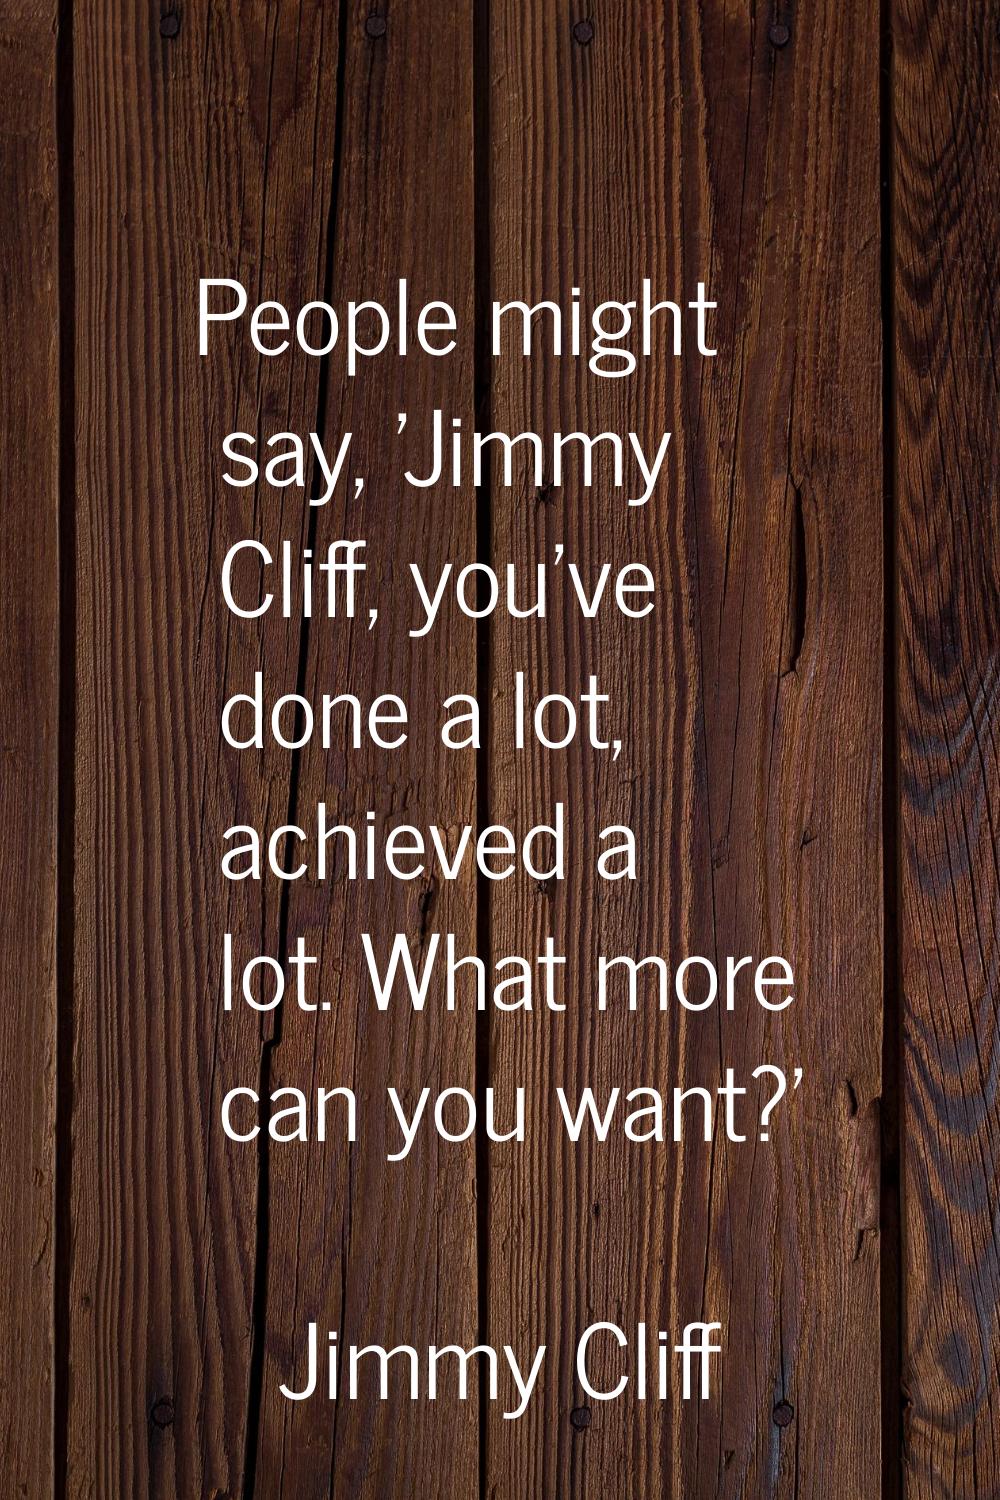 People might say, 'Jimmy Cliff, you've done a lot, achieved a lot. What more can you want?'